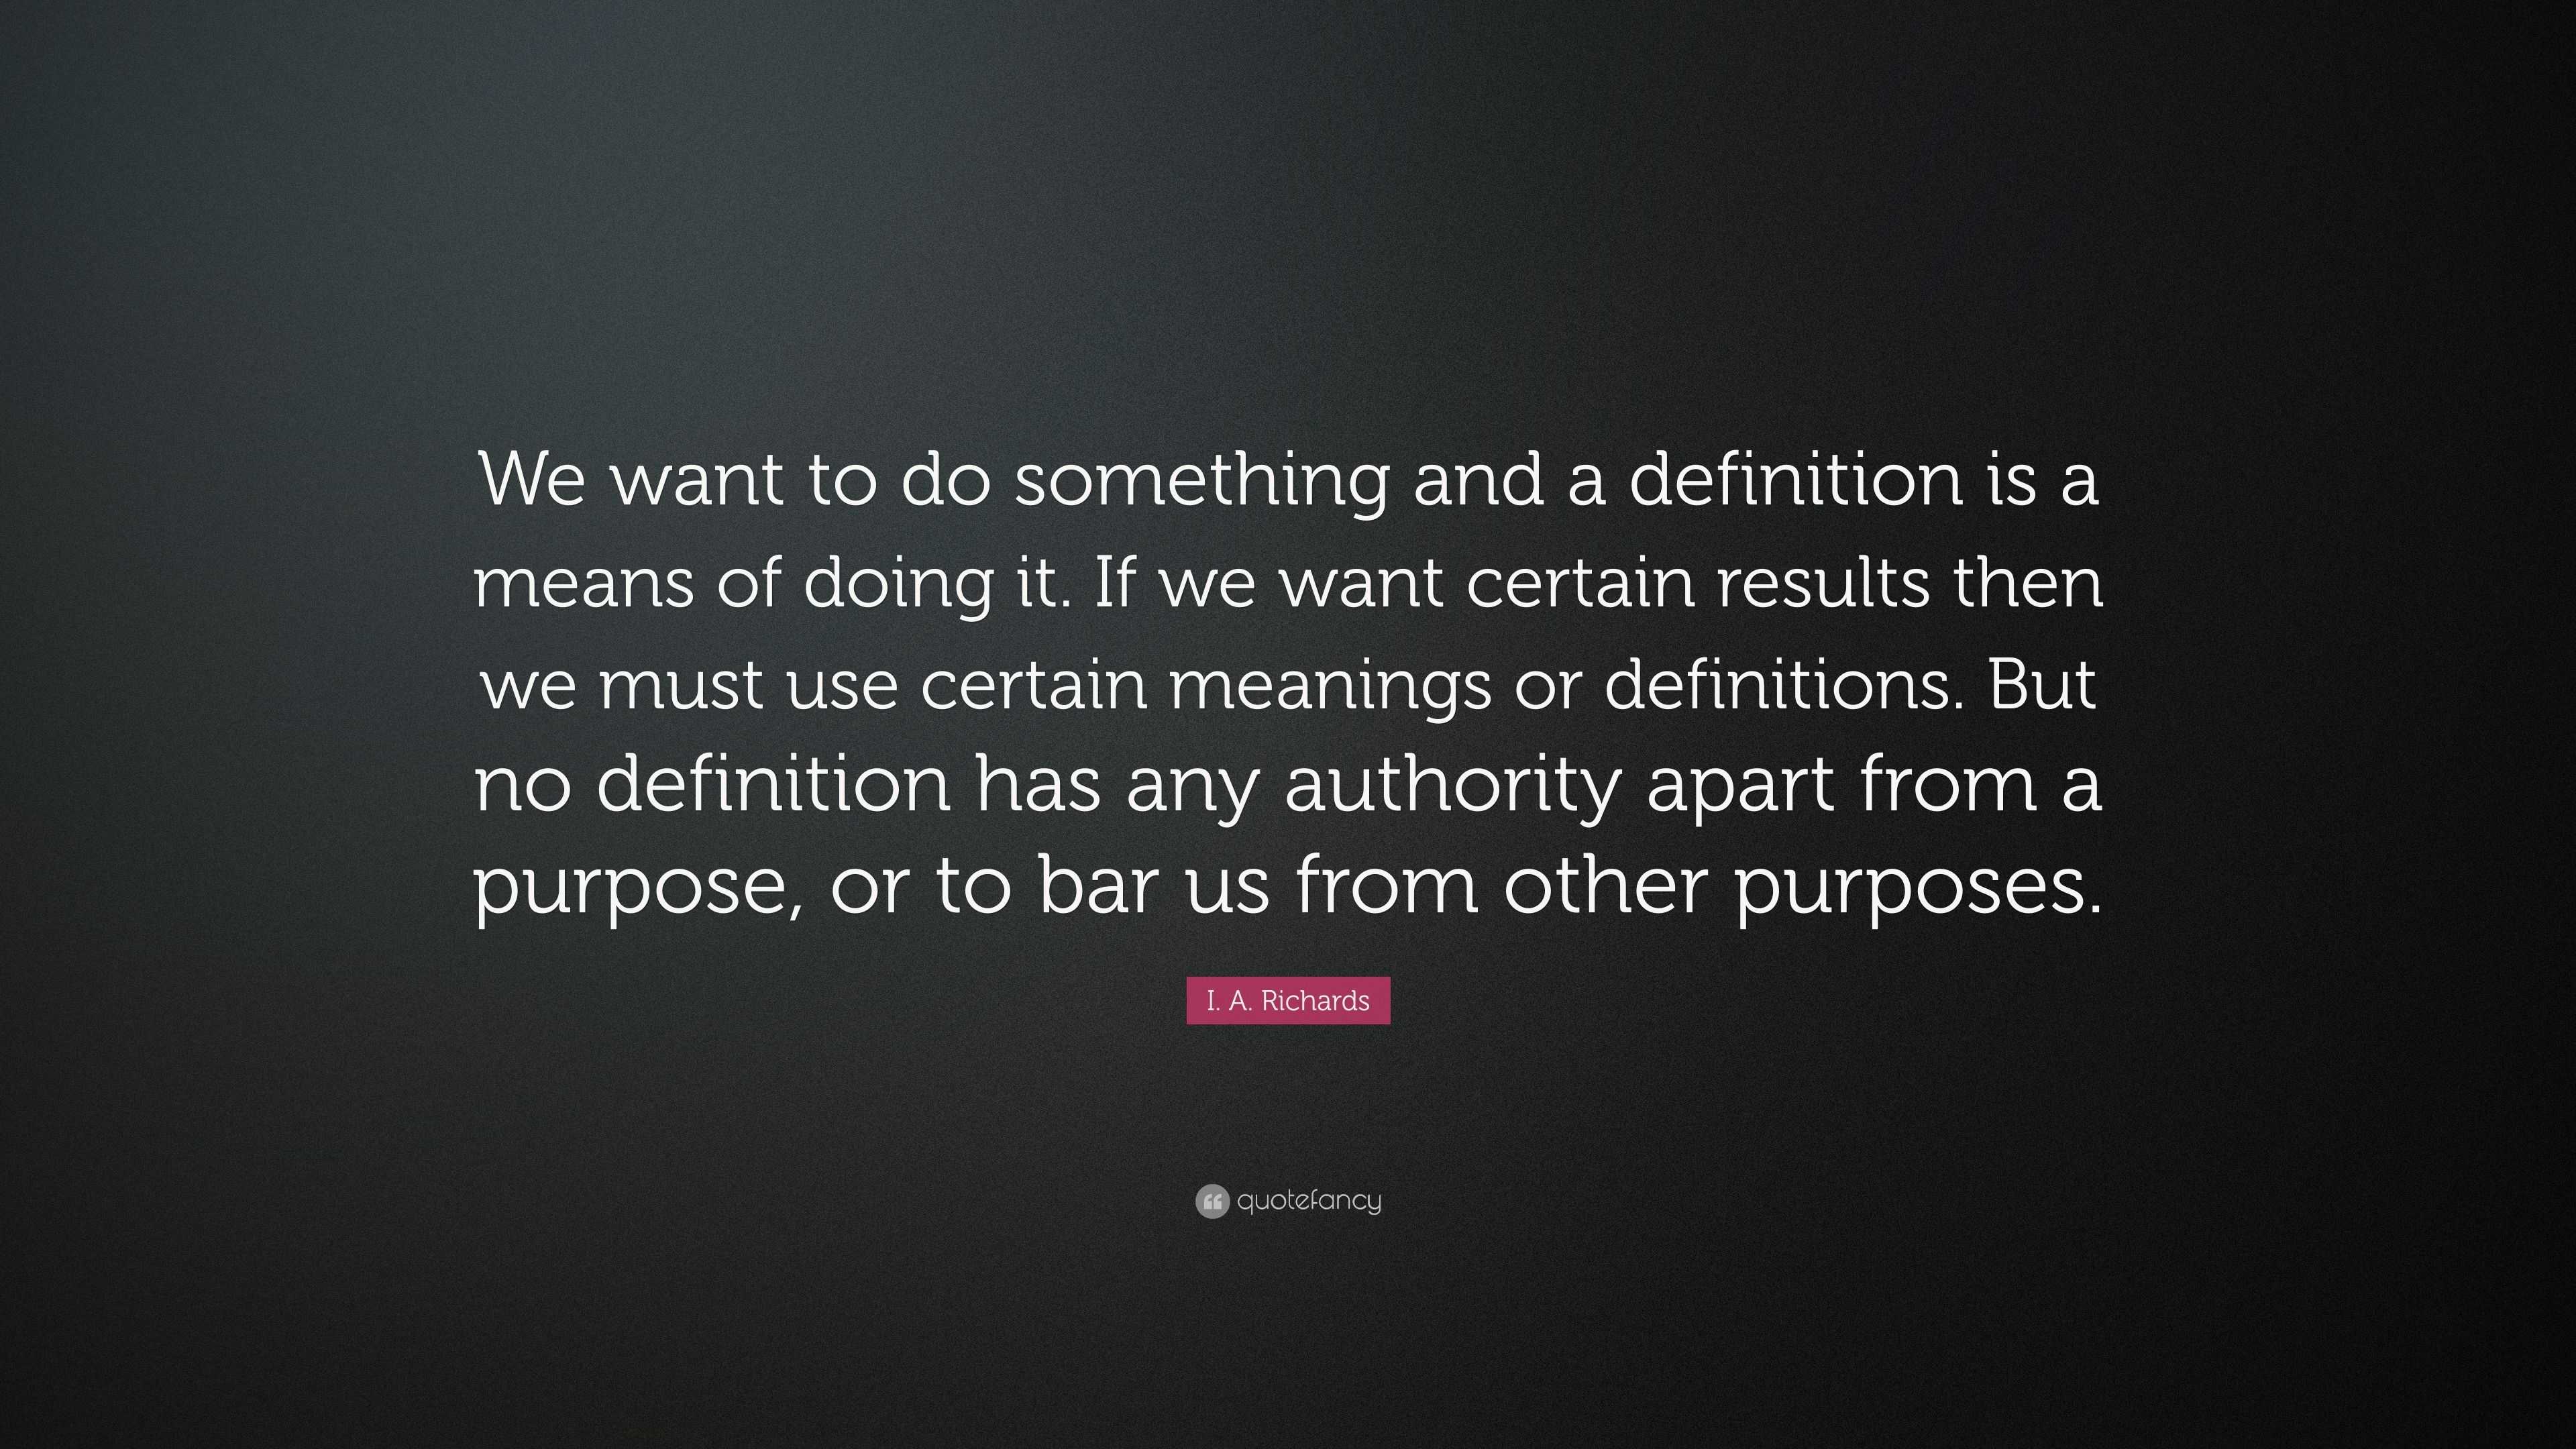 I. A. Richards Quote: “We want to do something and a definition is a ...